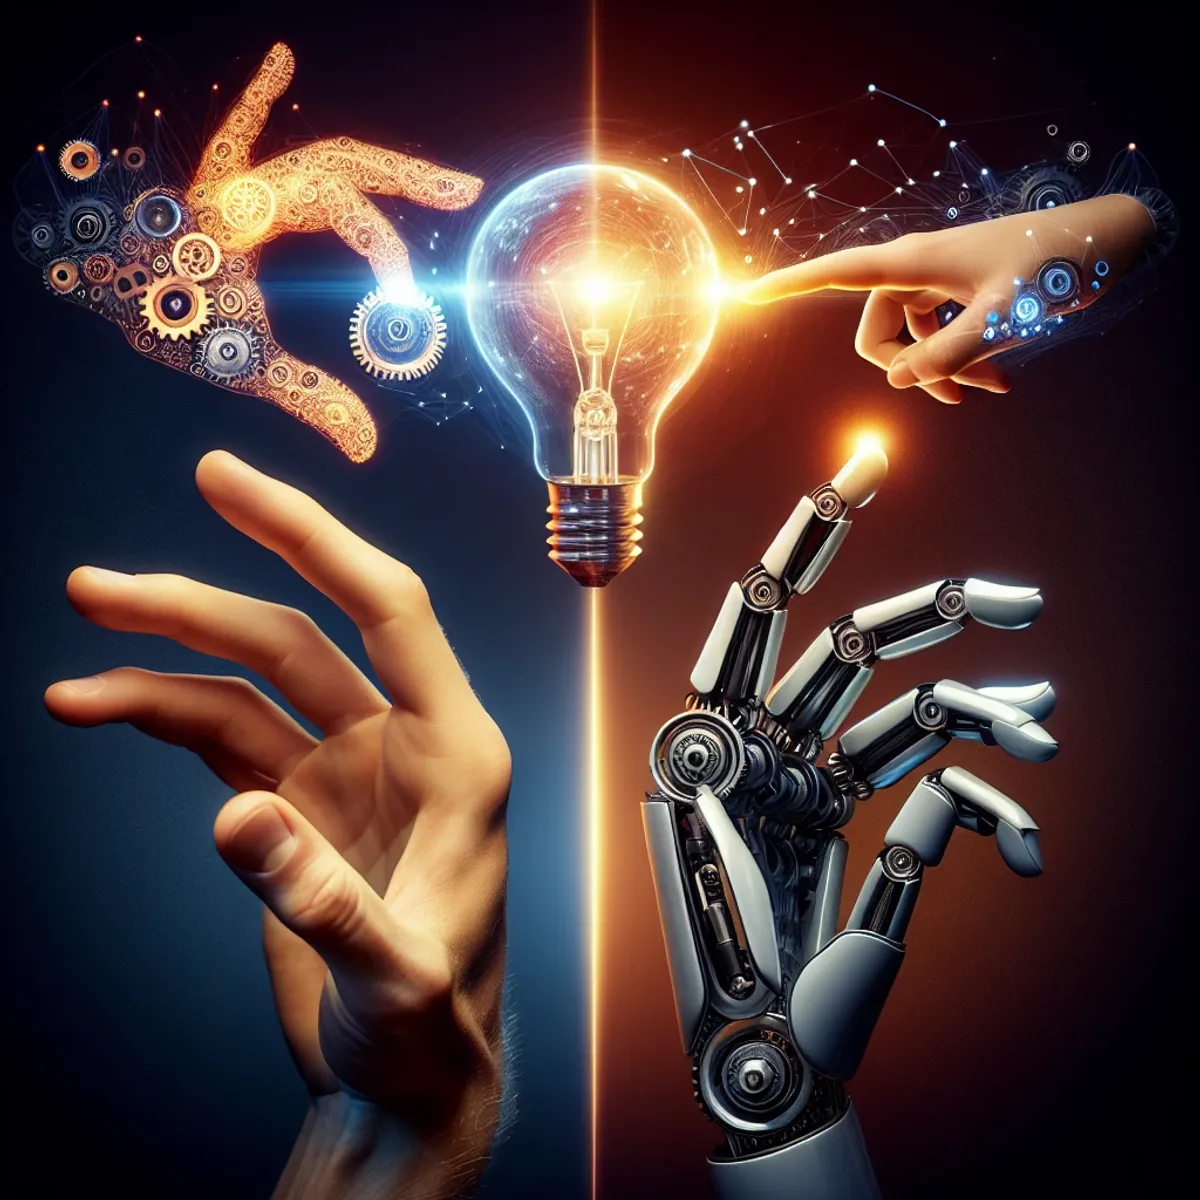 A human hand and a robotic hand clasping together over a gear and lightbulb intertwined.